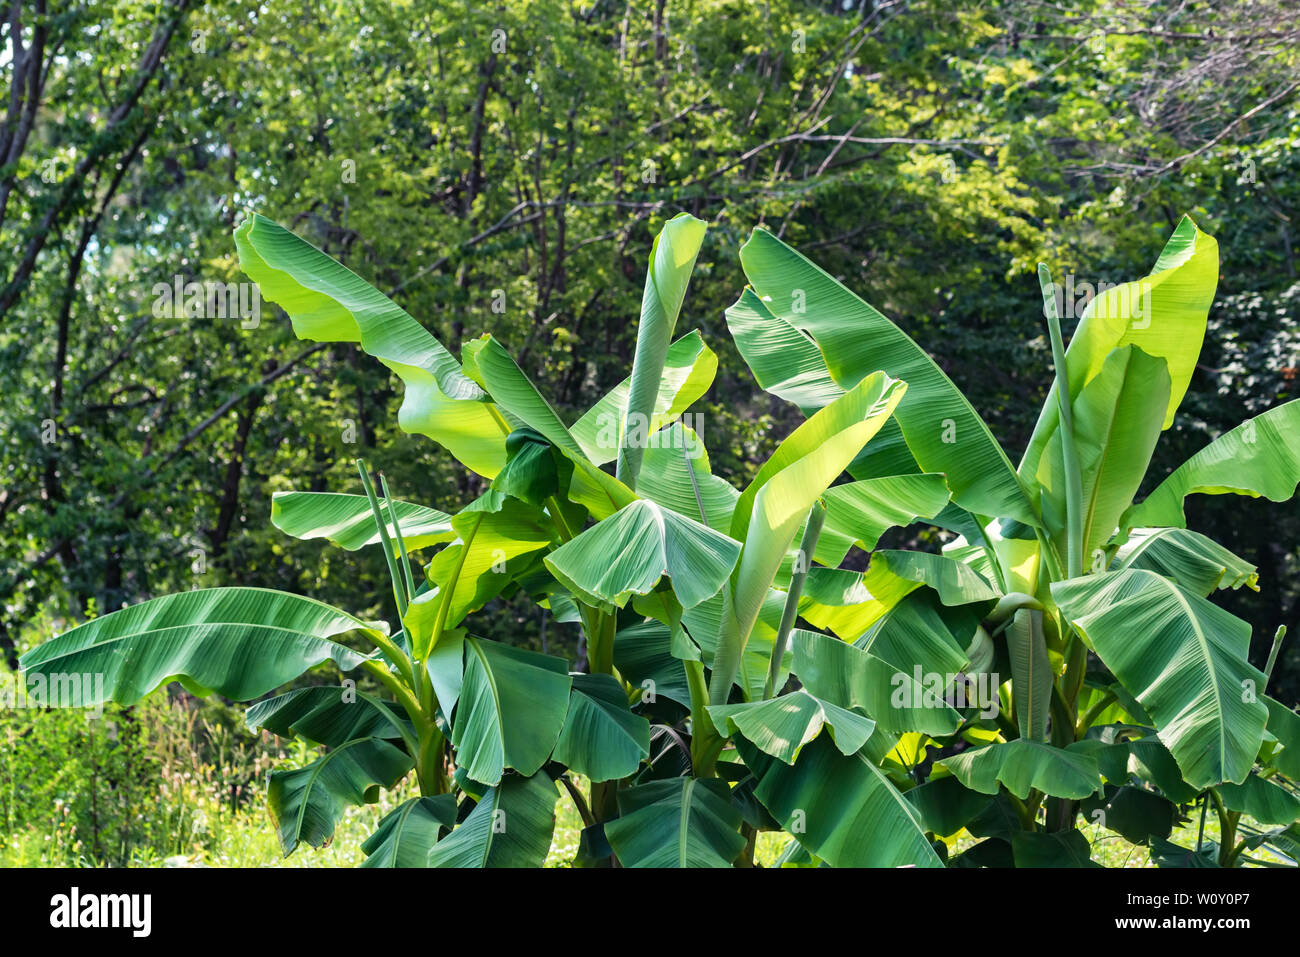 Close up green leaves of banana tree growinf in park Stock Photo